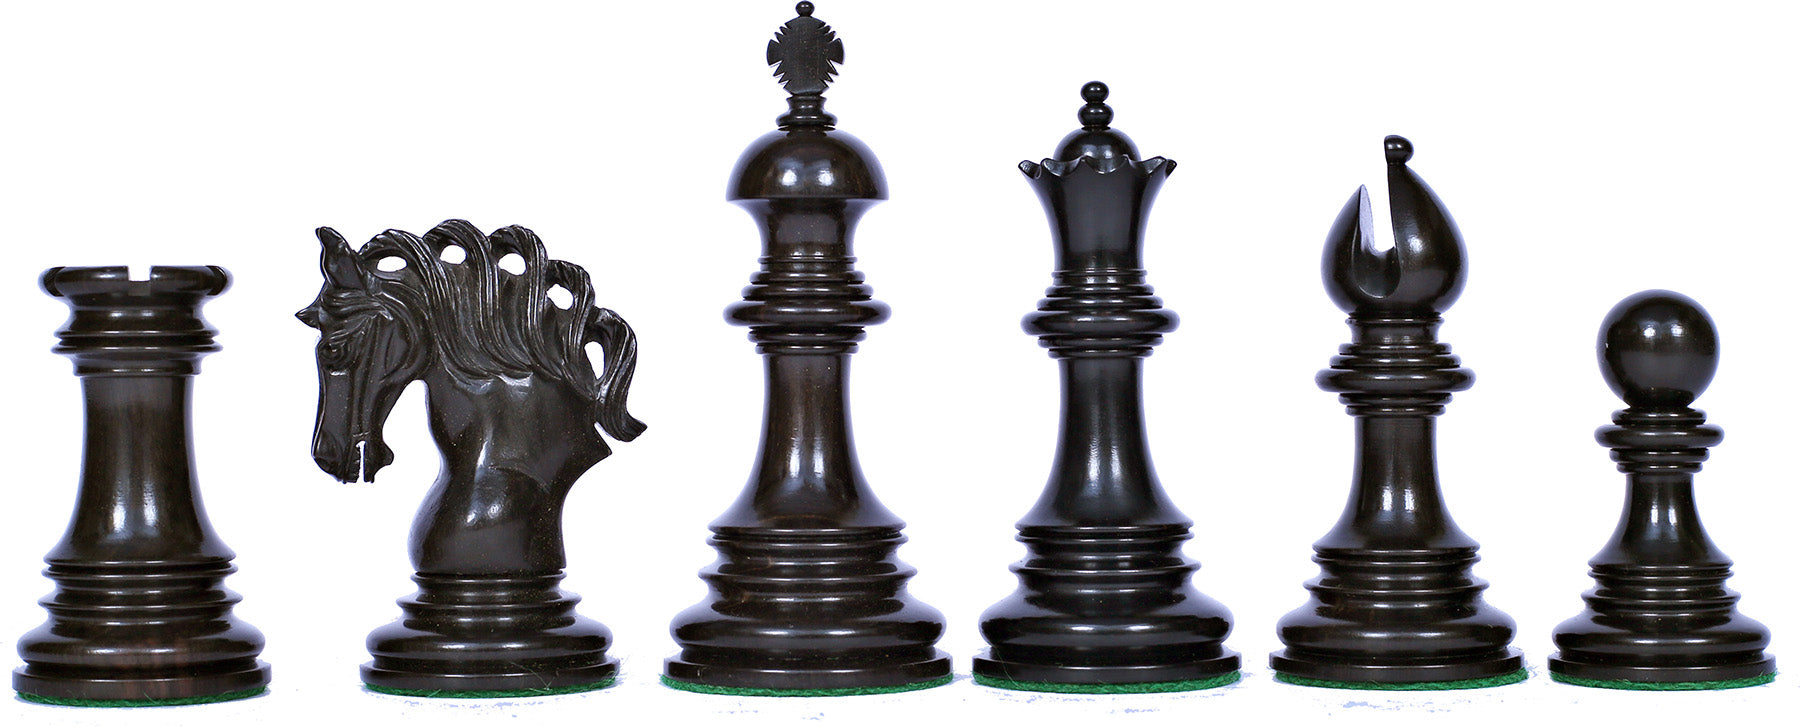 Westminster Series 4.4" Luxury Chess set in Ebony and Box Wood